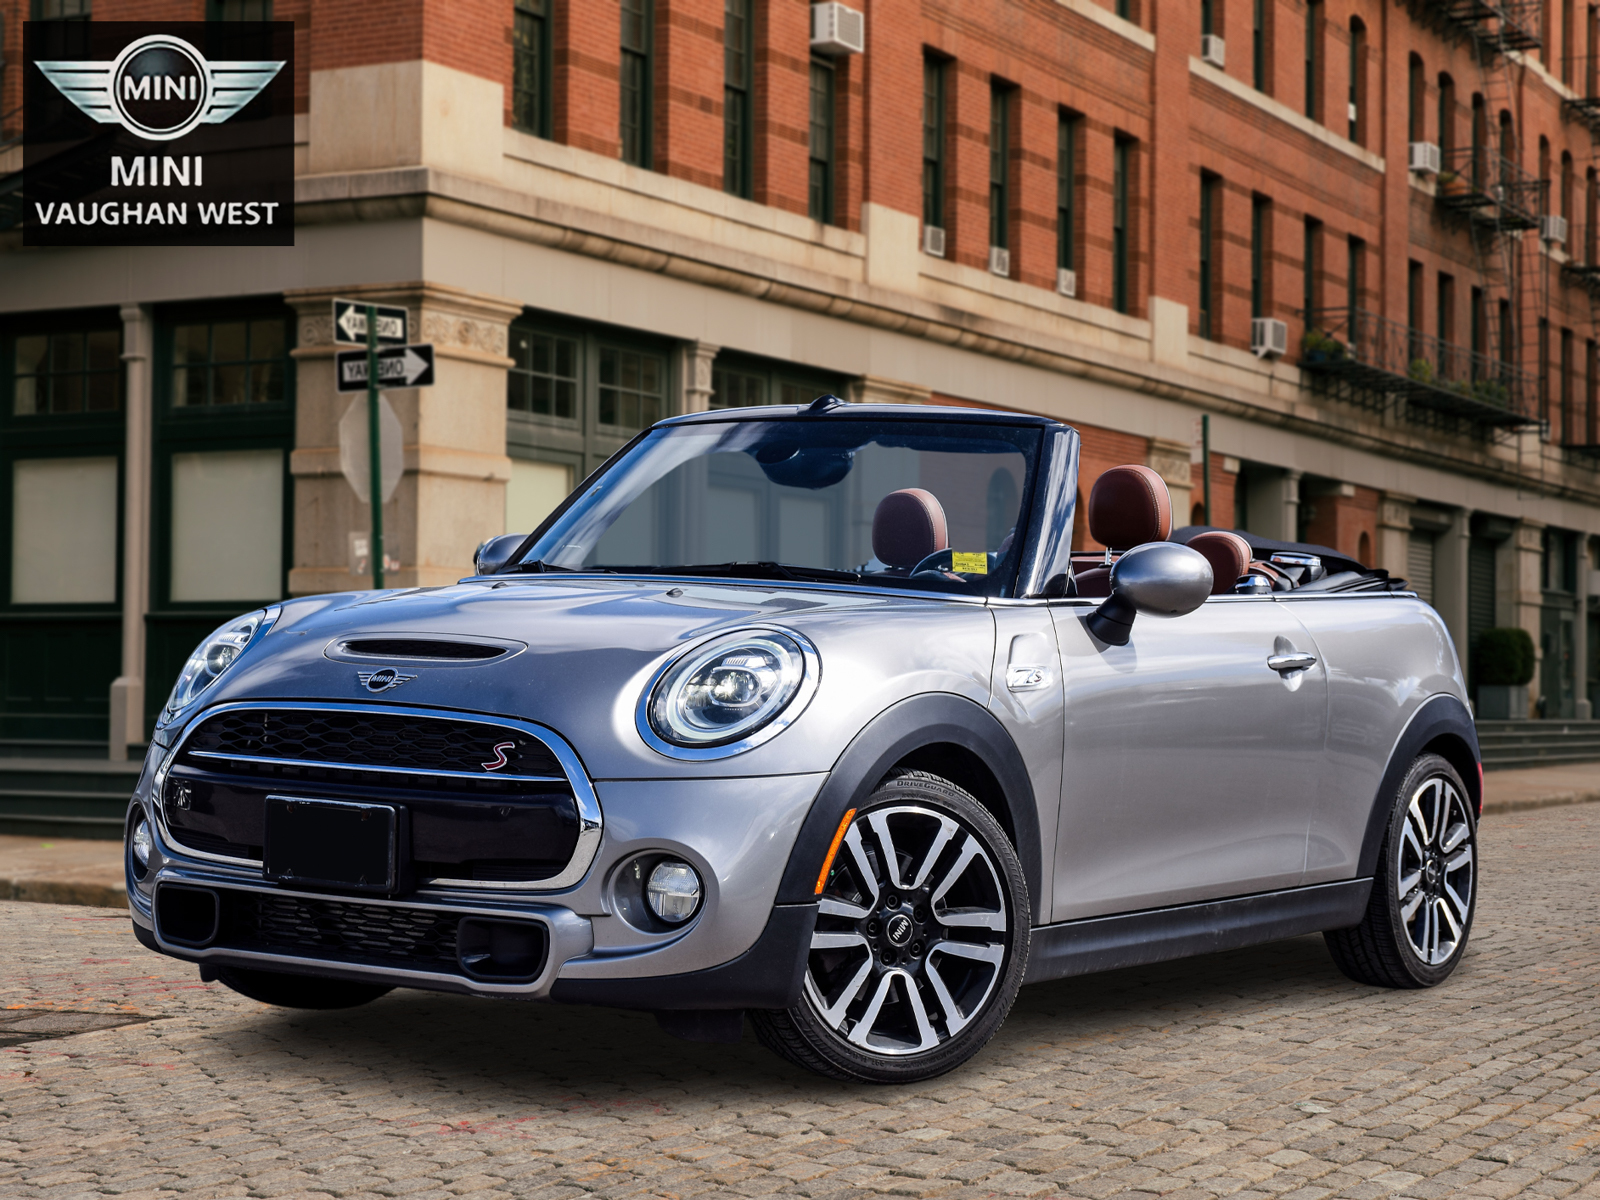 2019 MINI Cooper S Convertible Cooper S Convertible - Premier + Safety Certified 